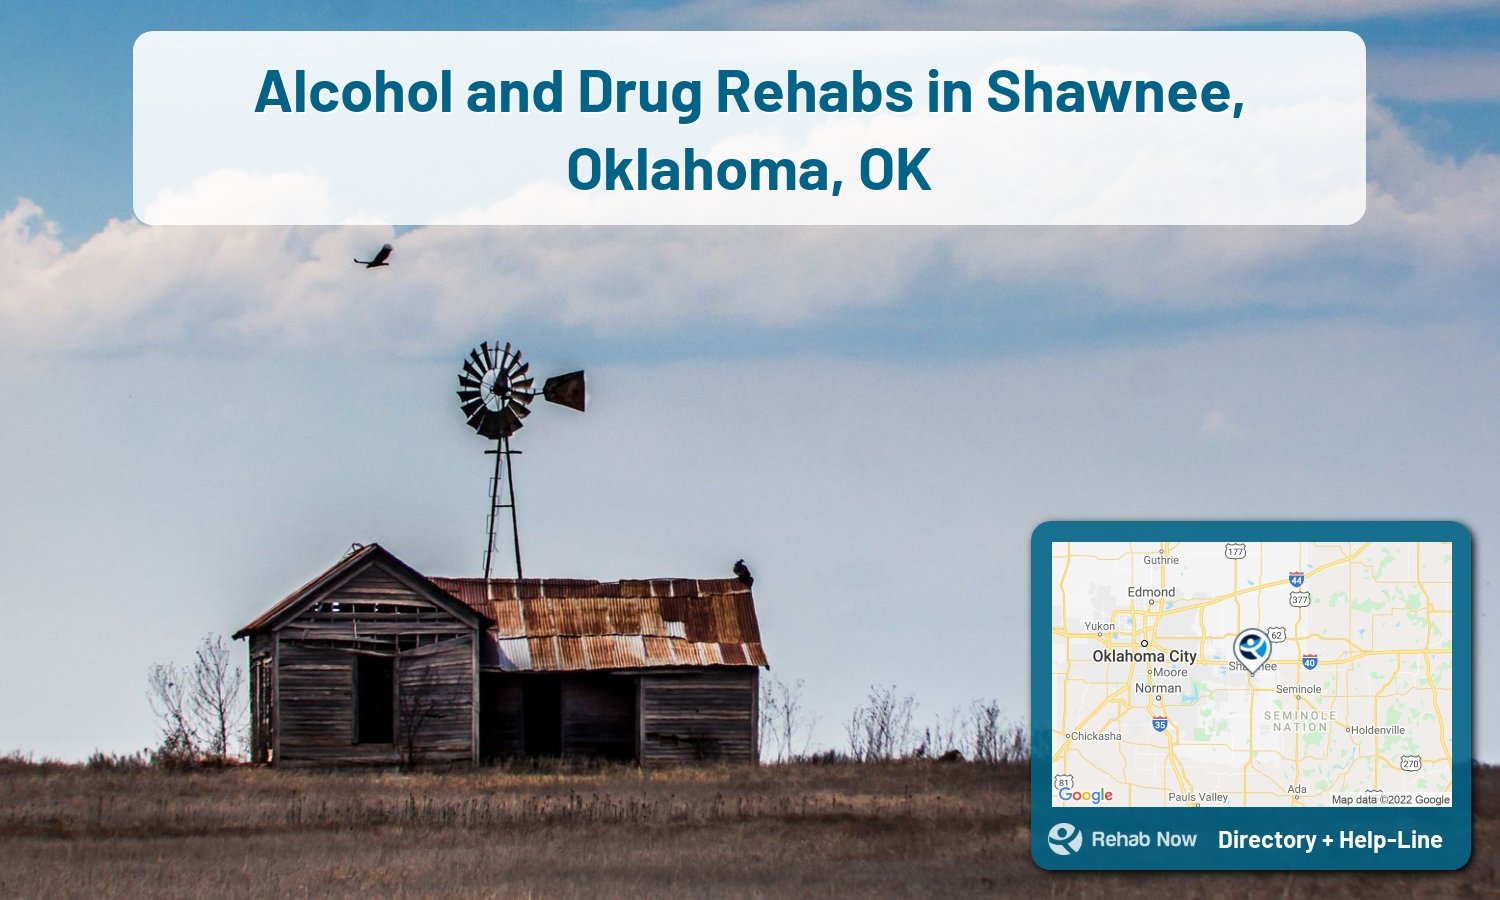 Our experts can help you find treatment now in Shawnee, Oklahoma. We list drug rehab and alcohol centers in Oklahoma.